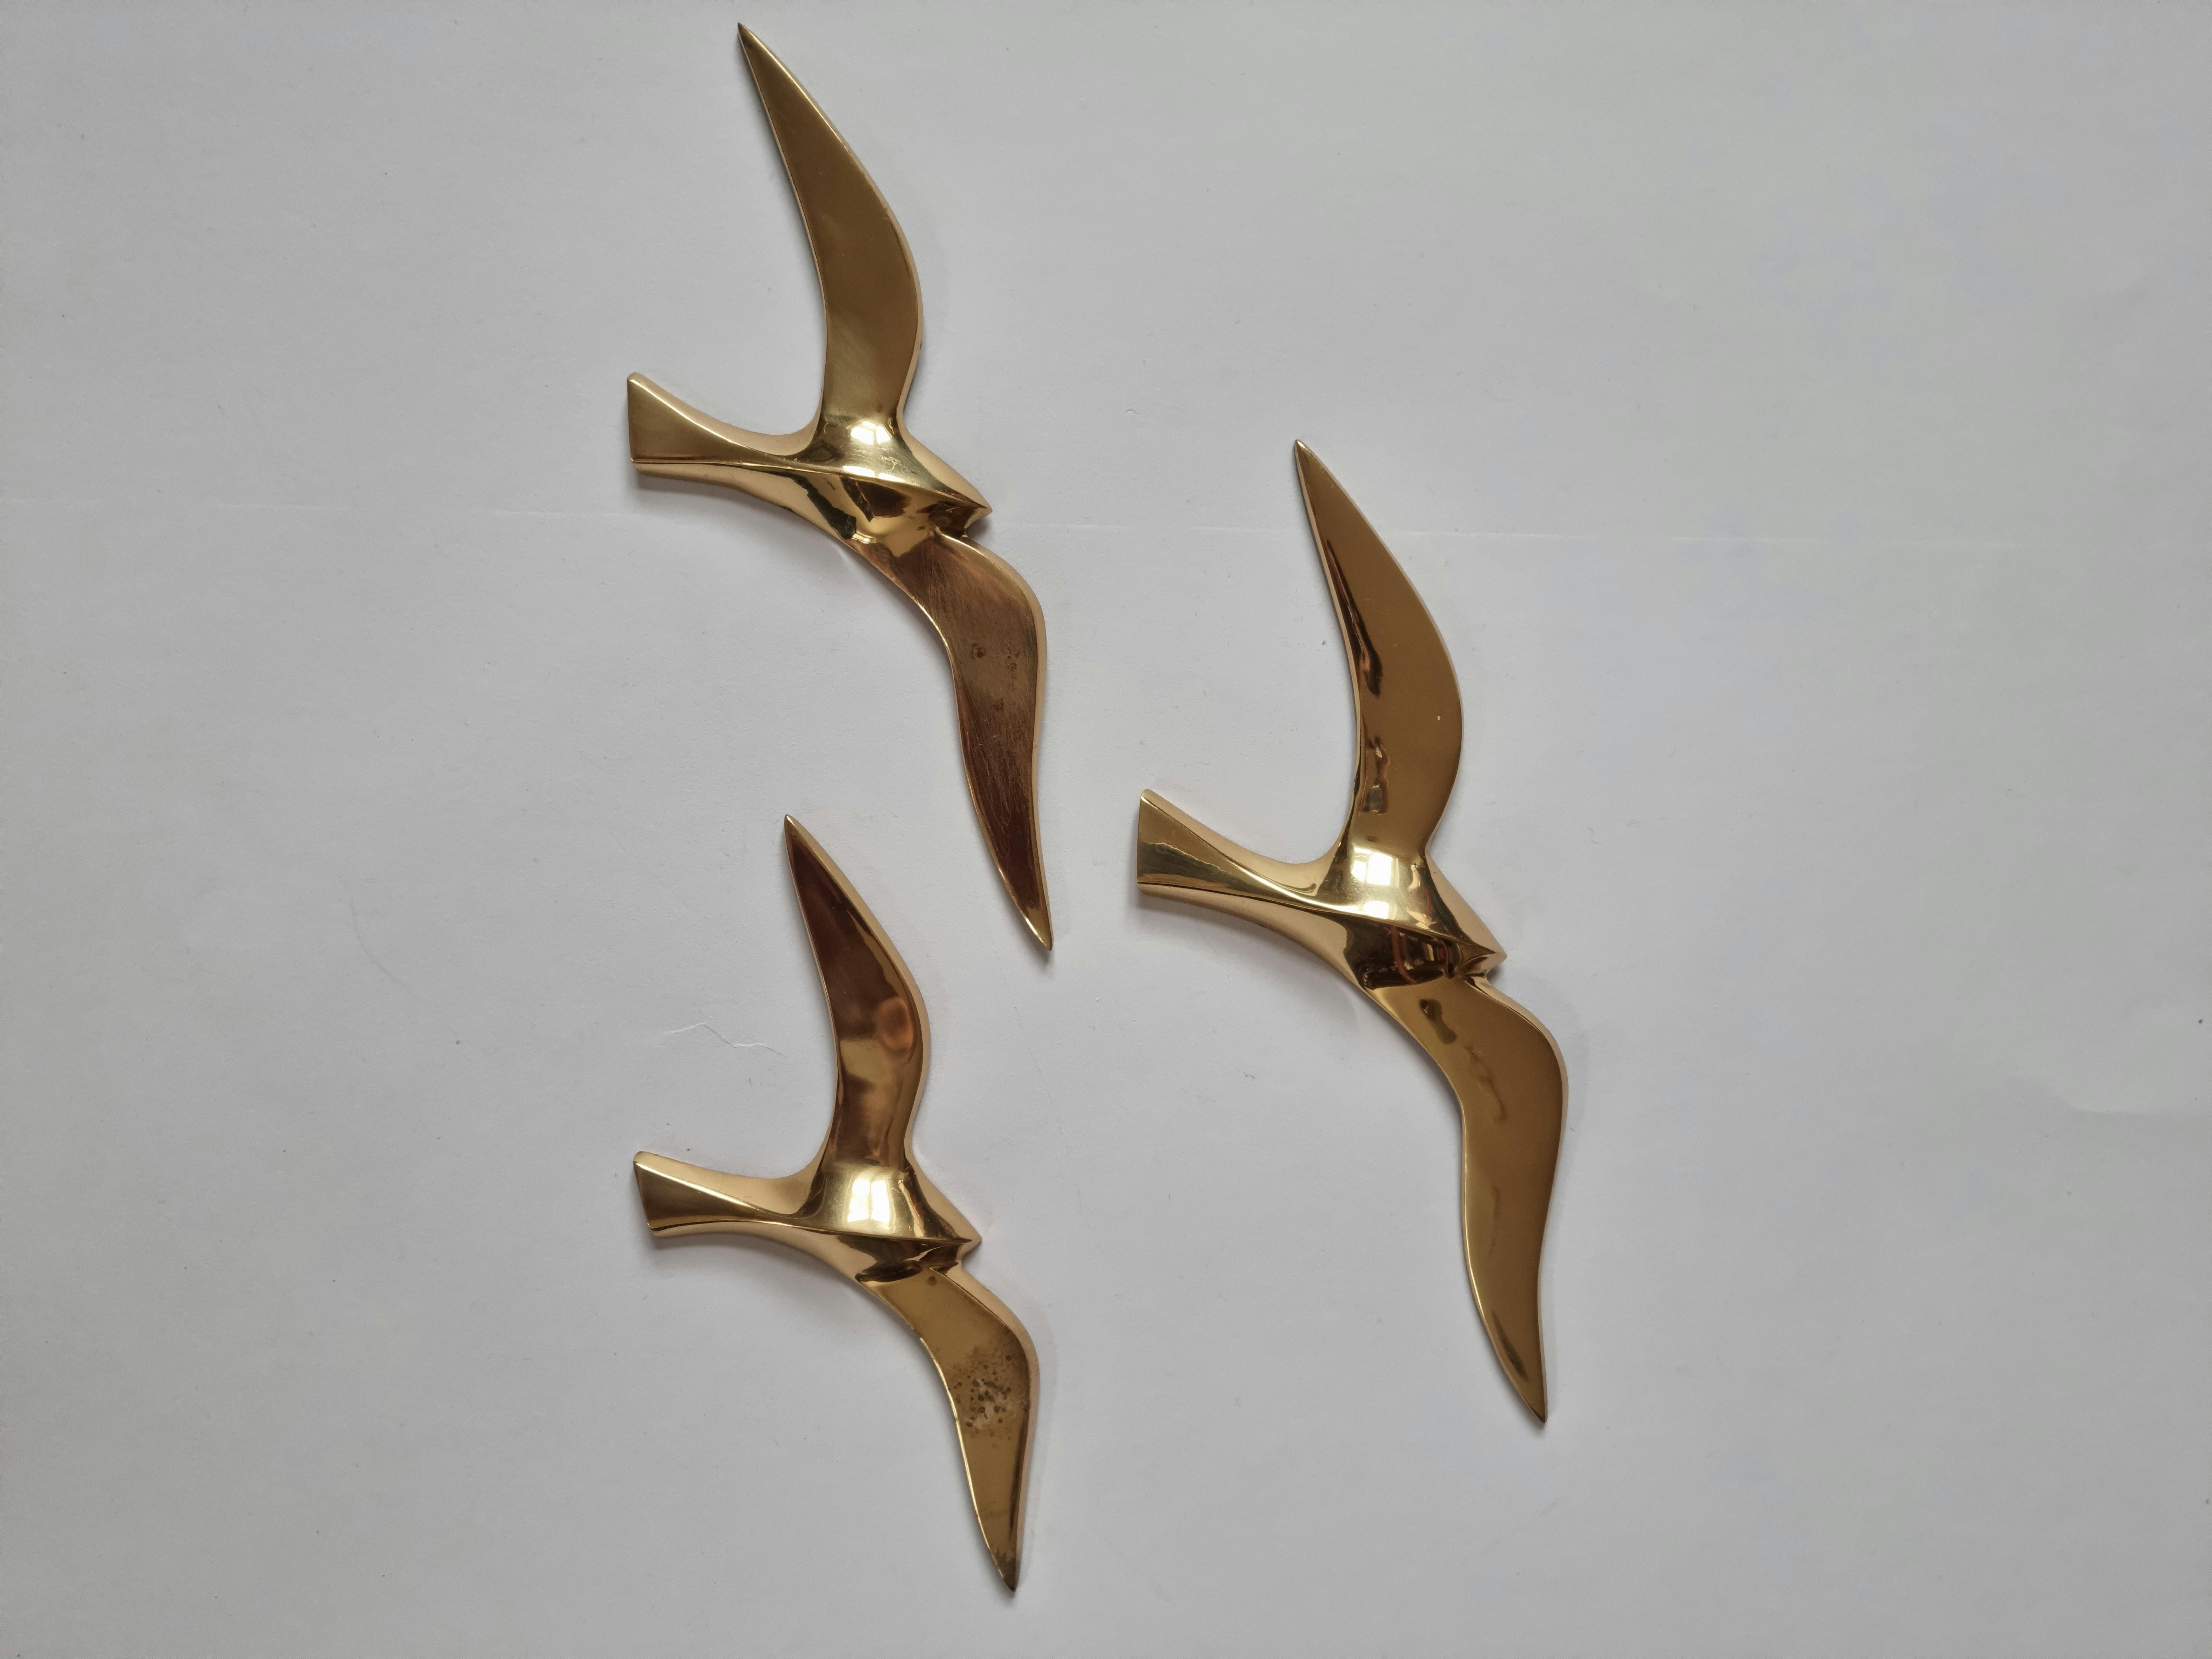 Mid-20th Century Set of Three Wall Brass Decor Sculptures of Seagulls, Austria, 1960s For Sale